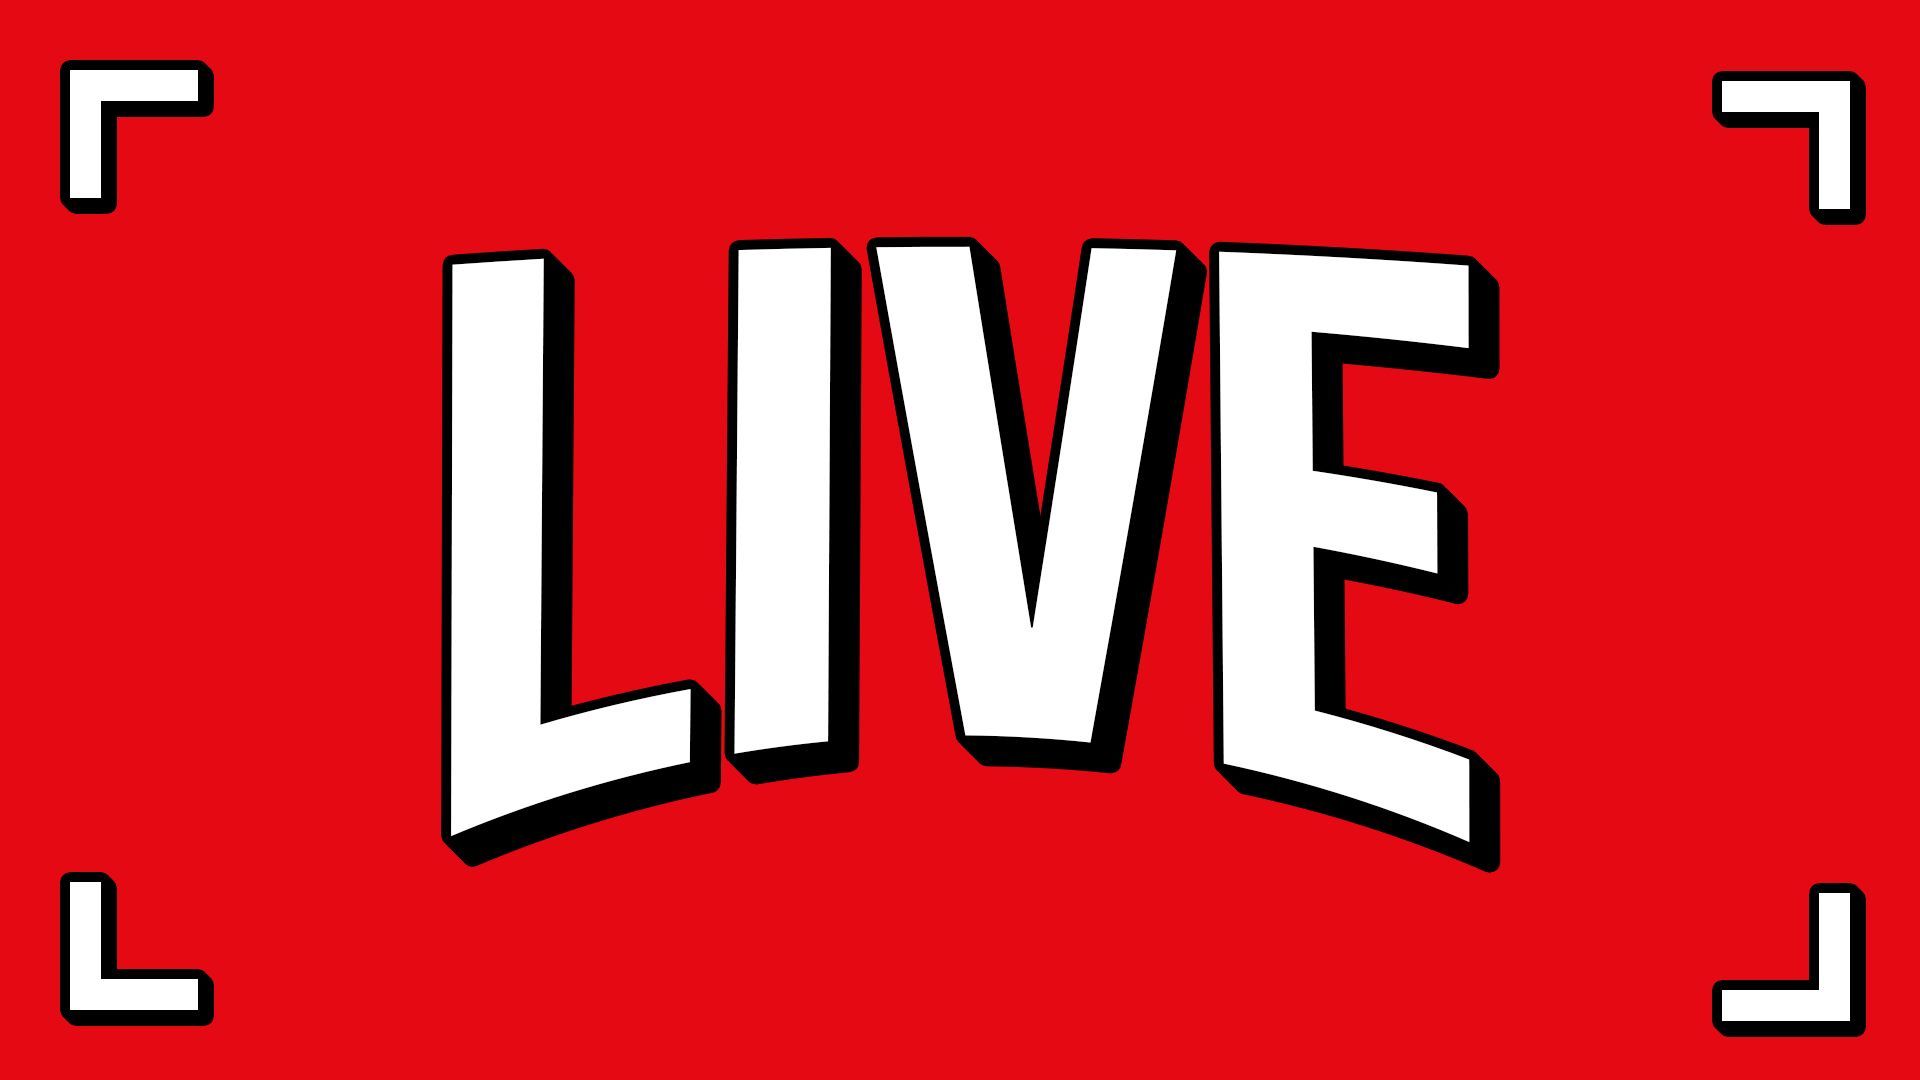 Illustration of the word LIVE in the style of the Netflix logo